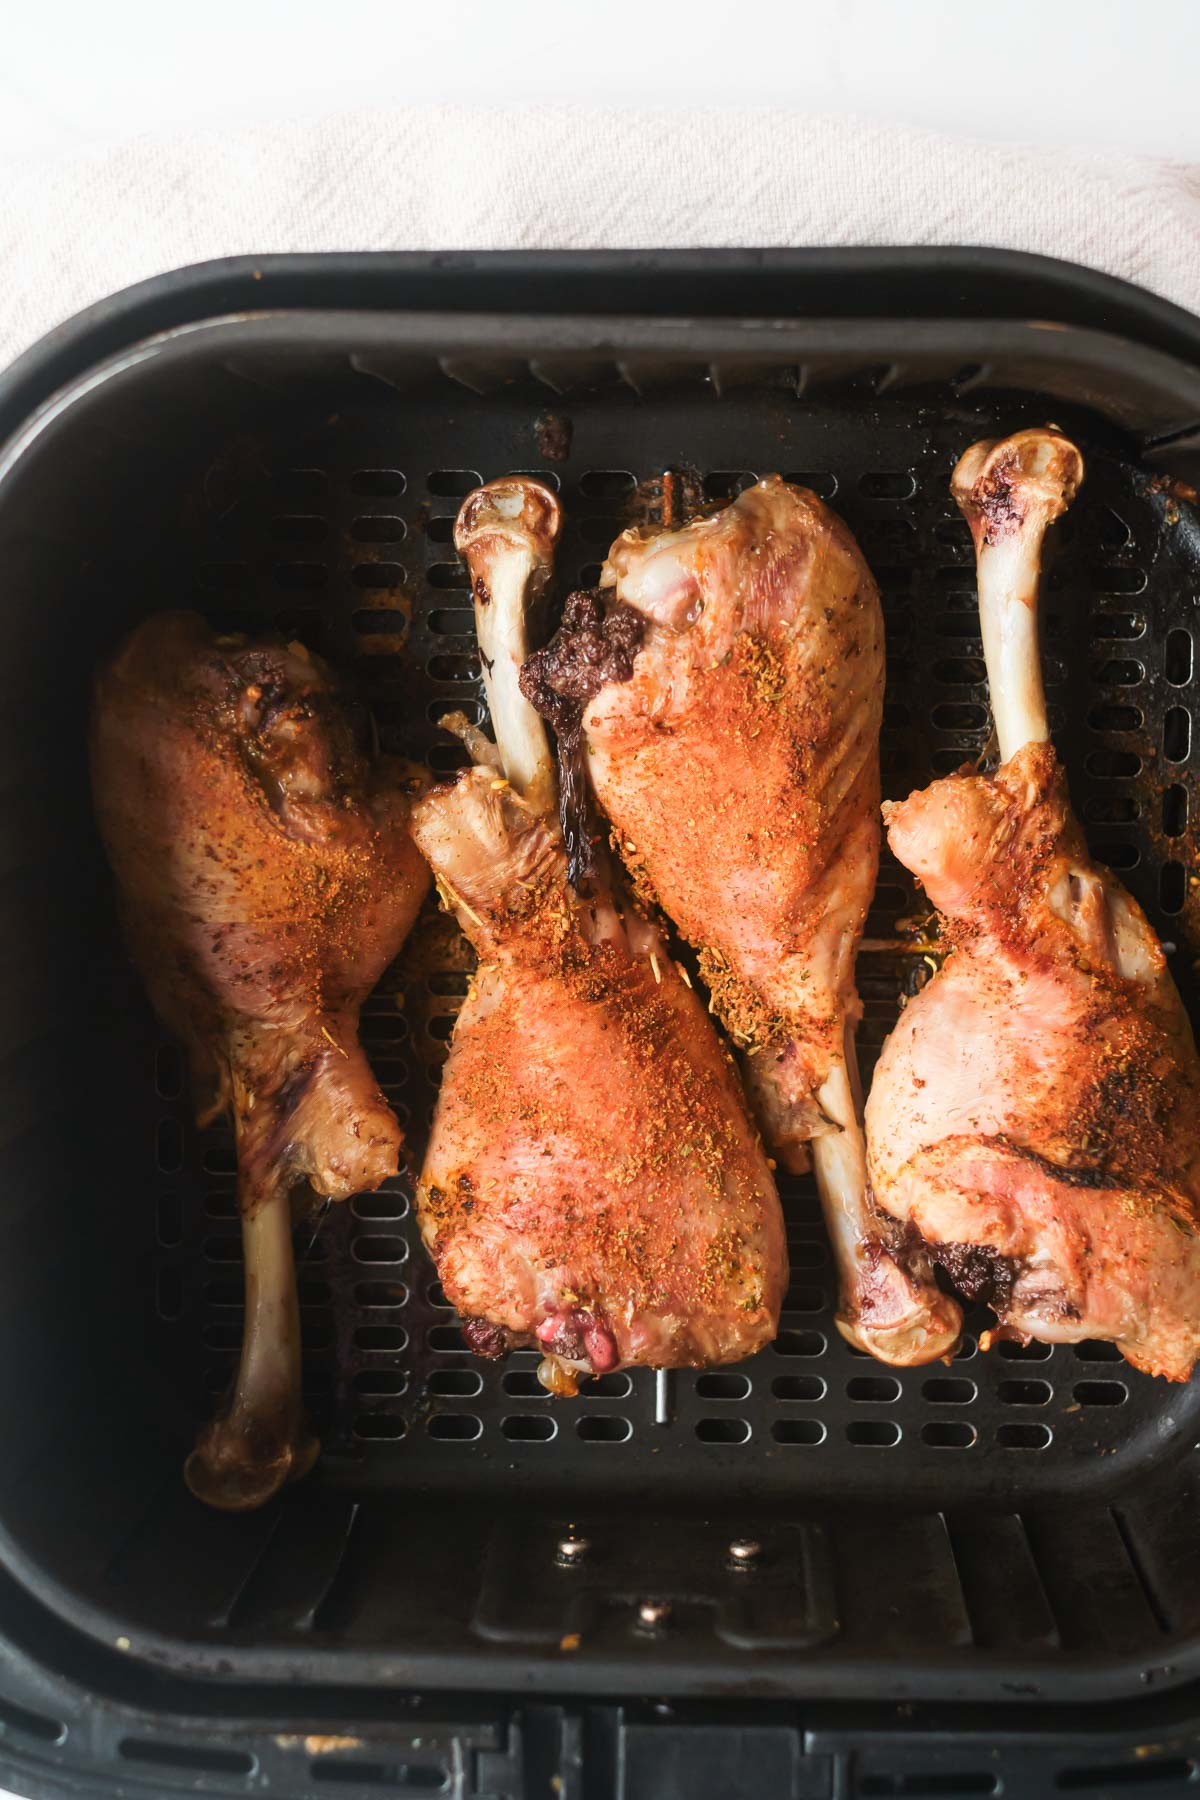 top down view of the cooked turkey legs in air fryer basket